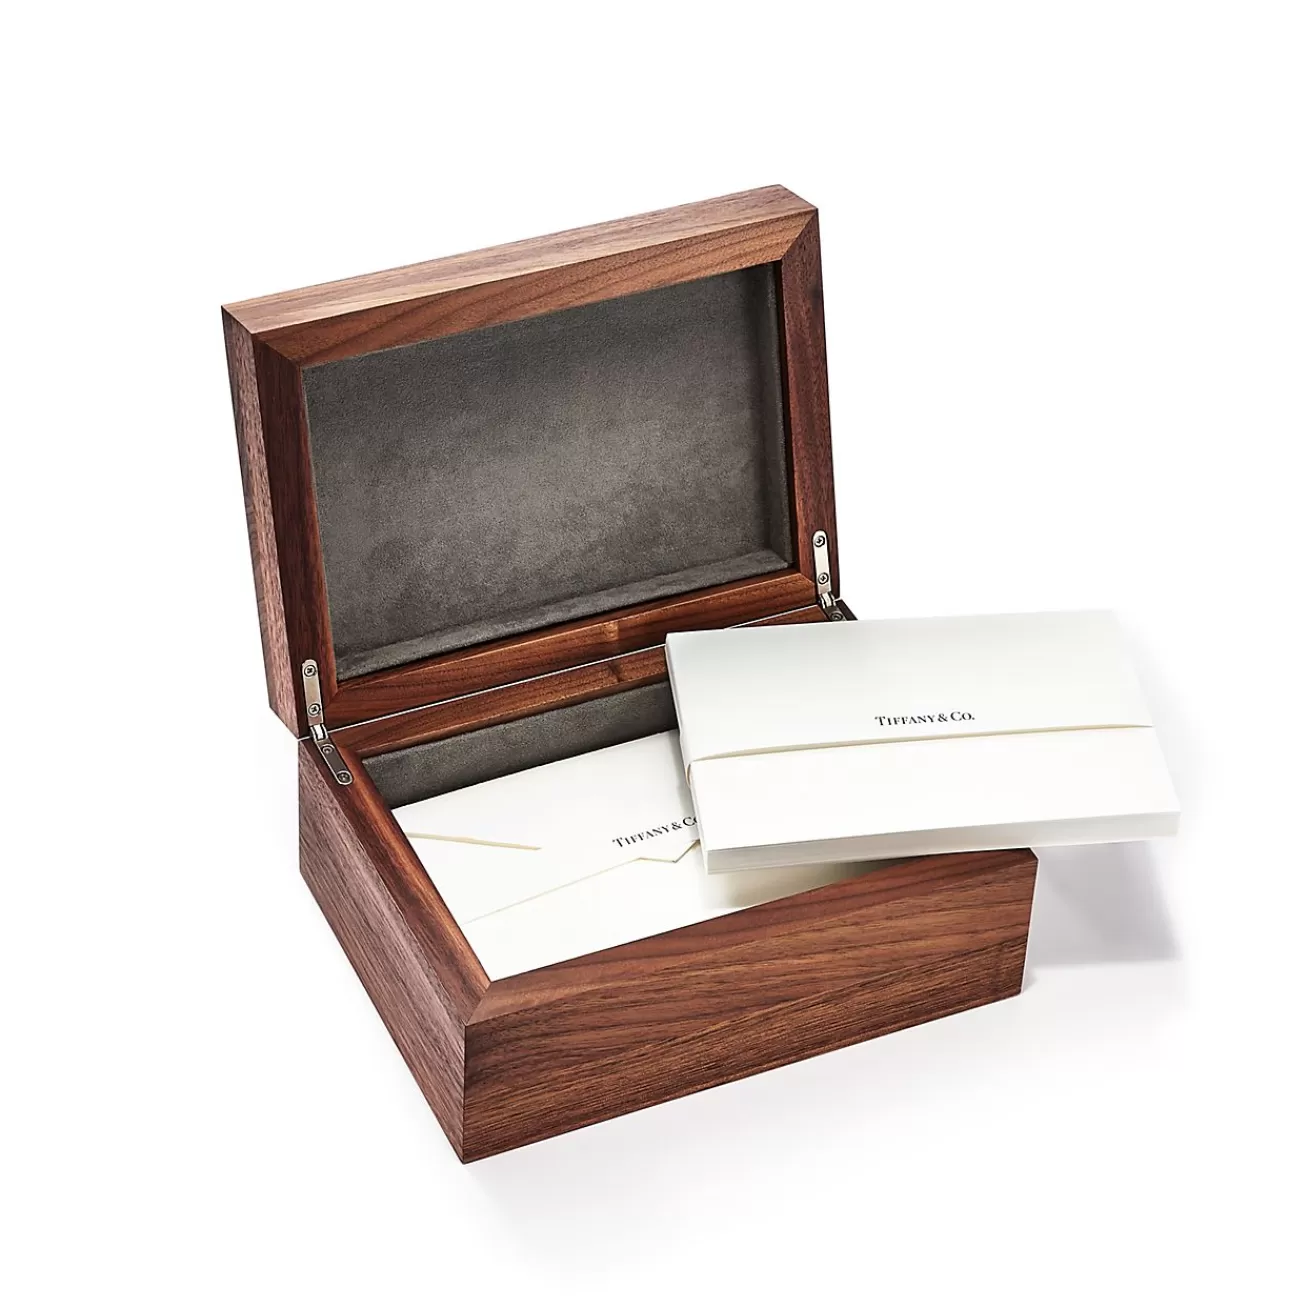 Tiffany & Co. Stationery box in American walnut and sterling silver. | ^ Stationery, Games & Unique Objects | Games & Novelties